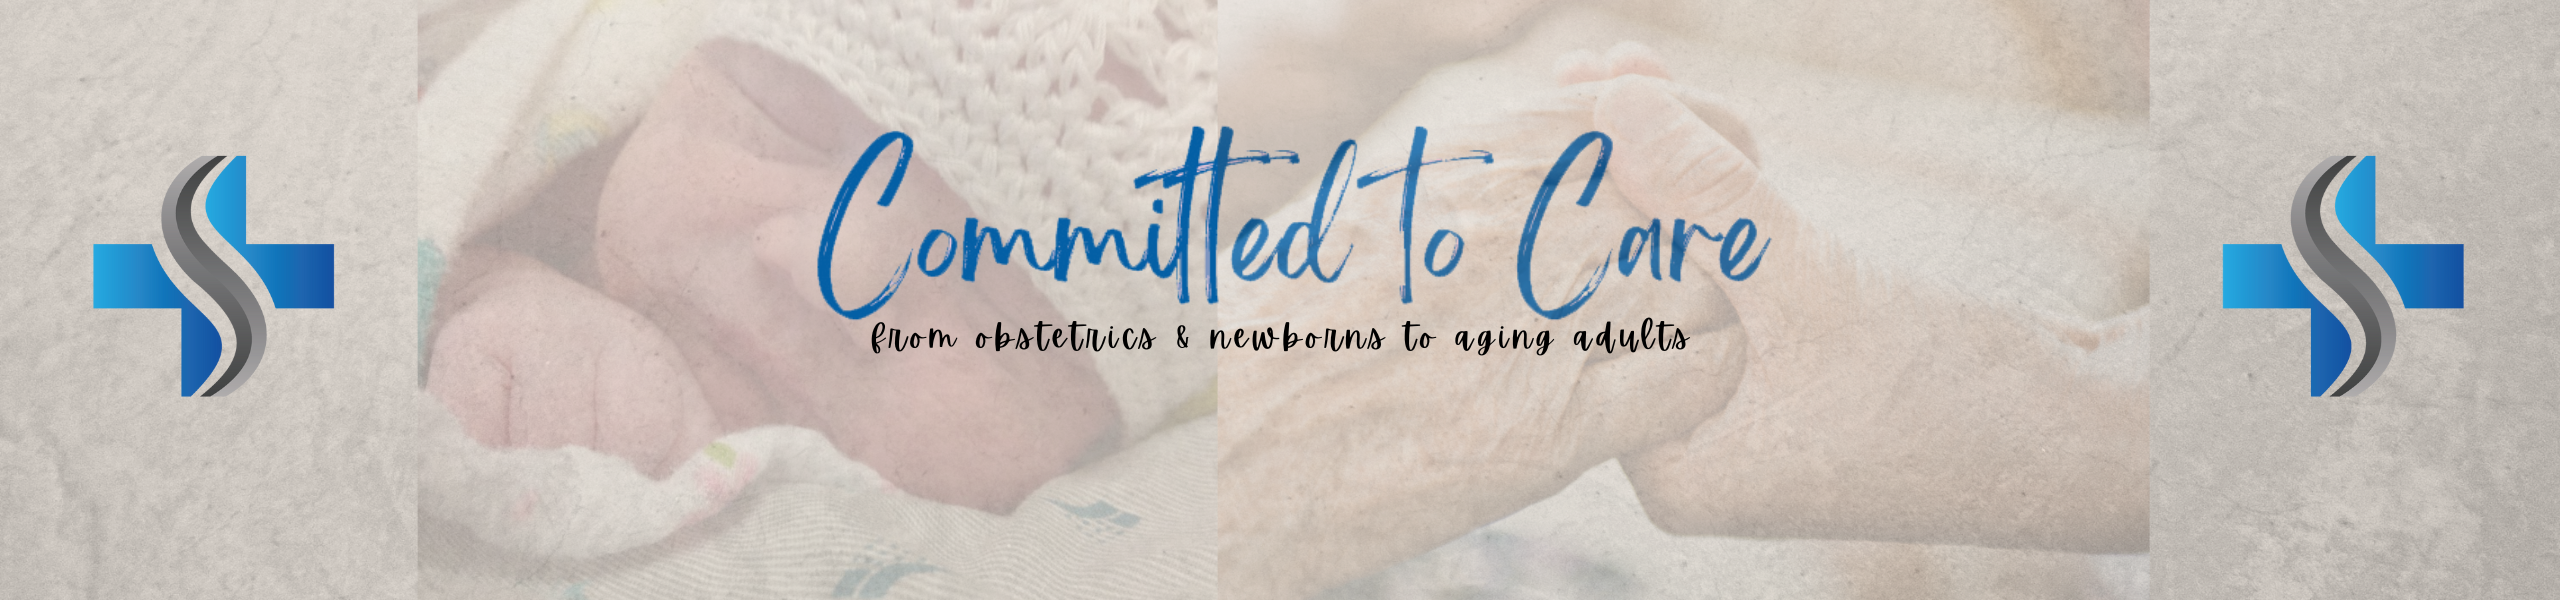 Committed to Care
from obstetrics and newborns ro aging adults